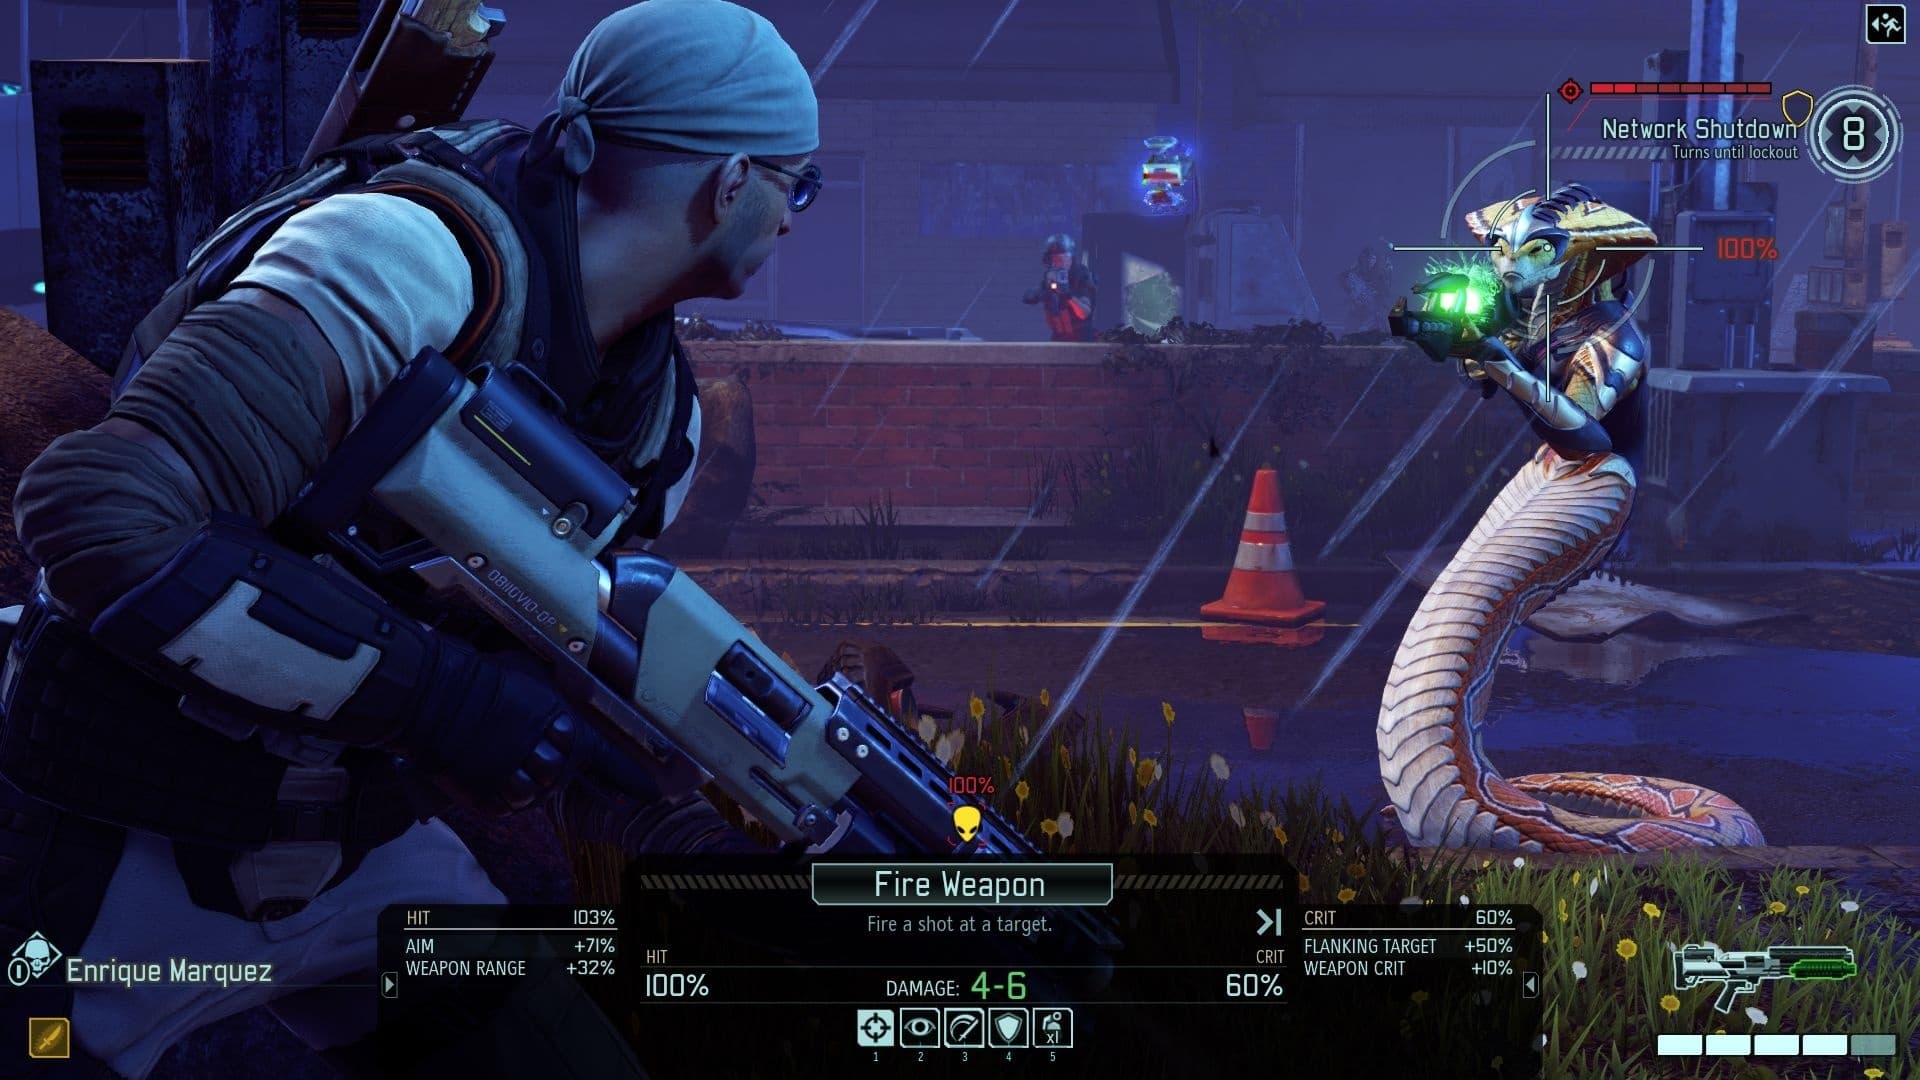 XCOM 2 works on hit chances. I'm telling you now: At least once, you'll be pissed off about a missed attack.